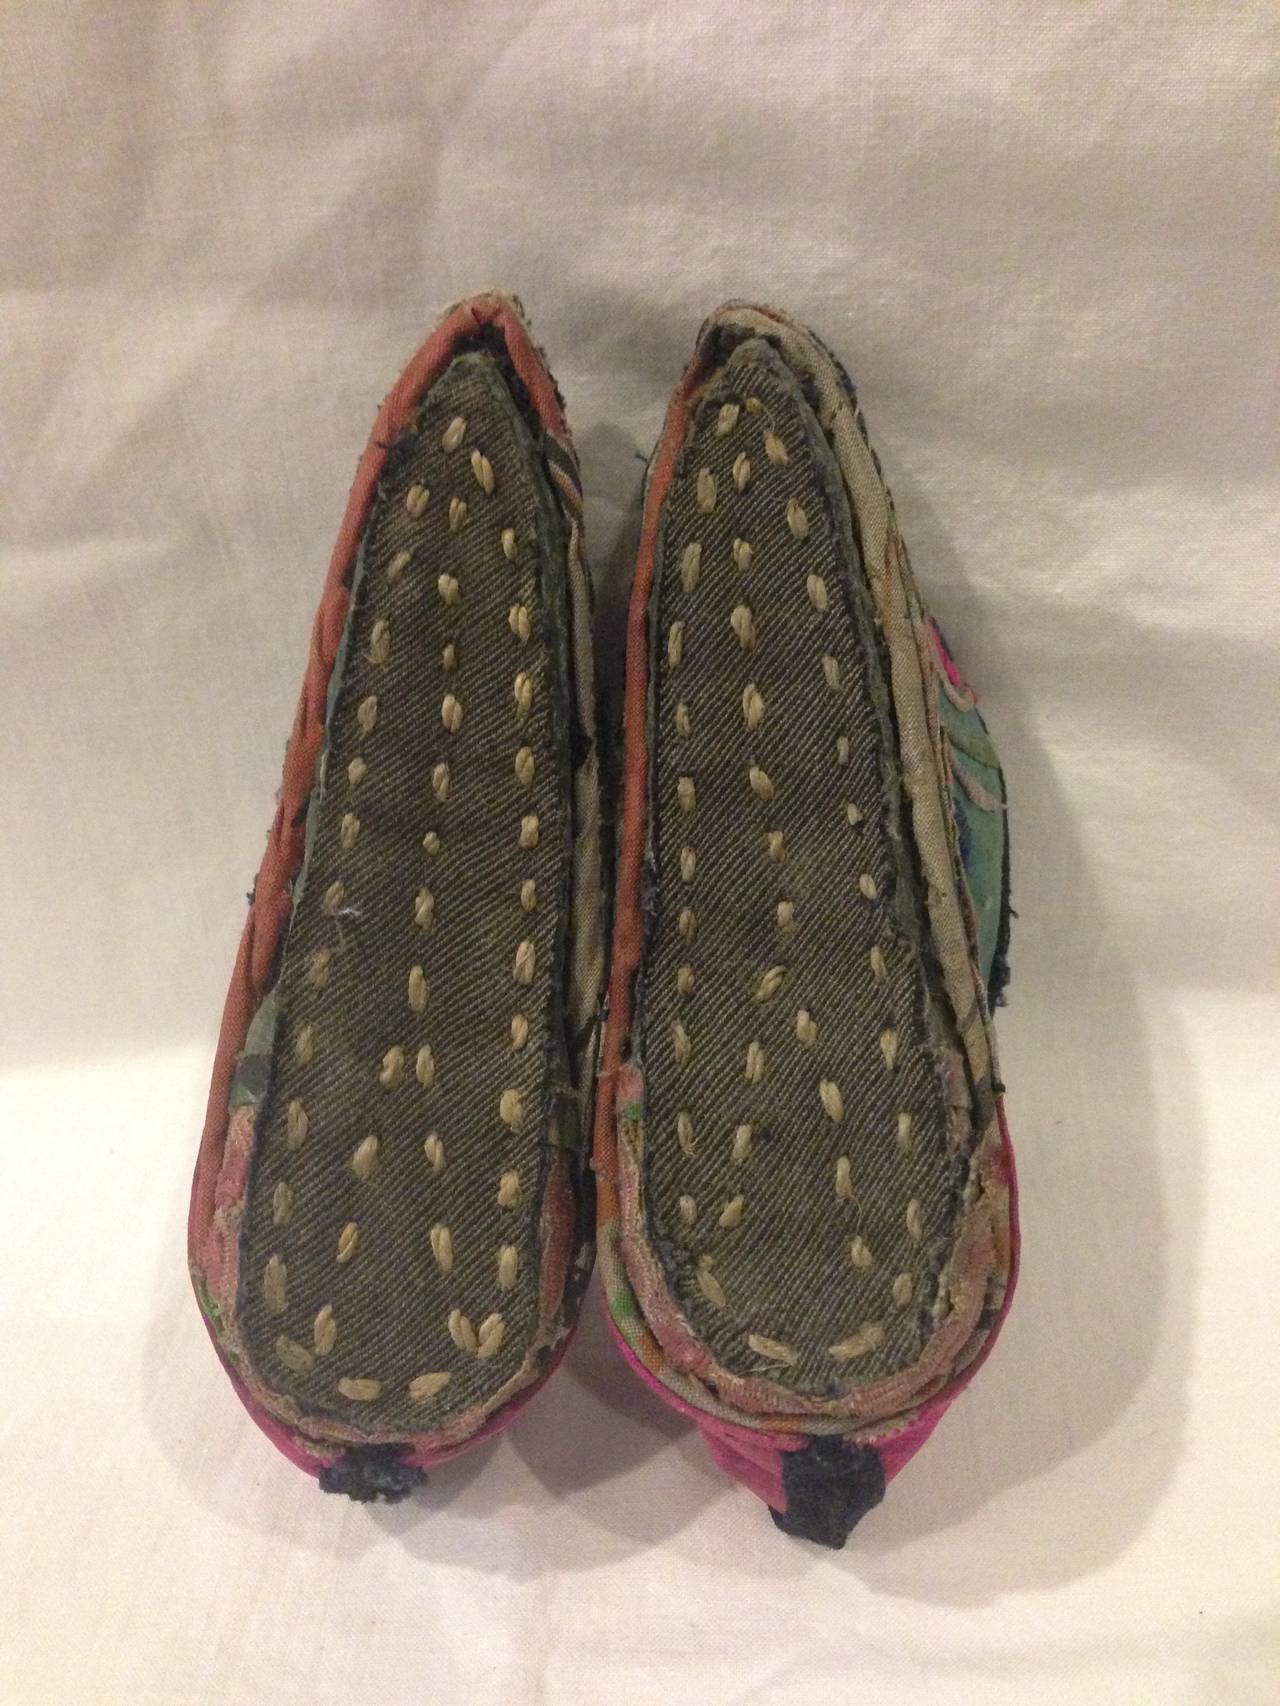 19th Century Chinese Antique Golden Lily Slippers With Embroidery For Sale 1